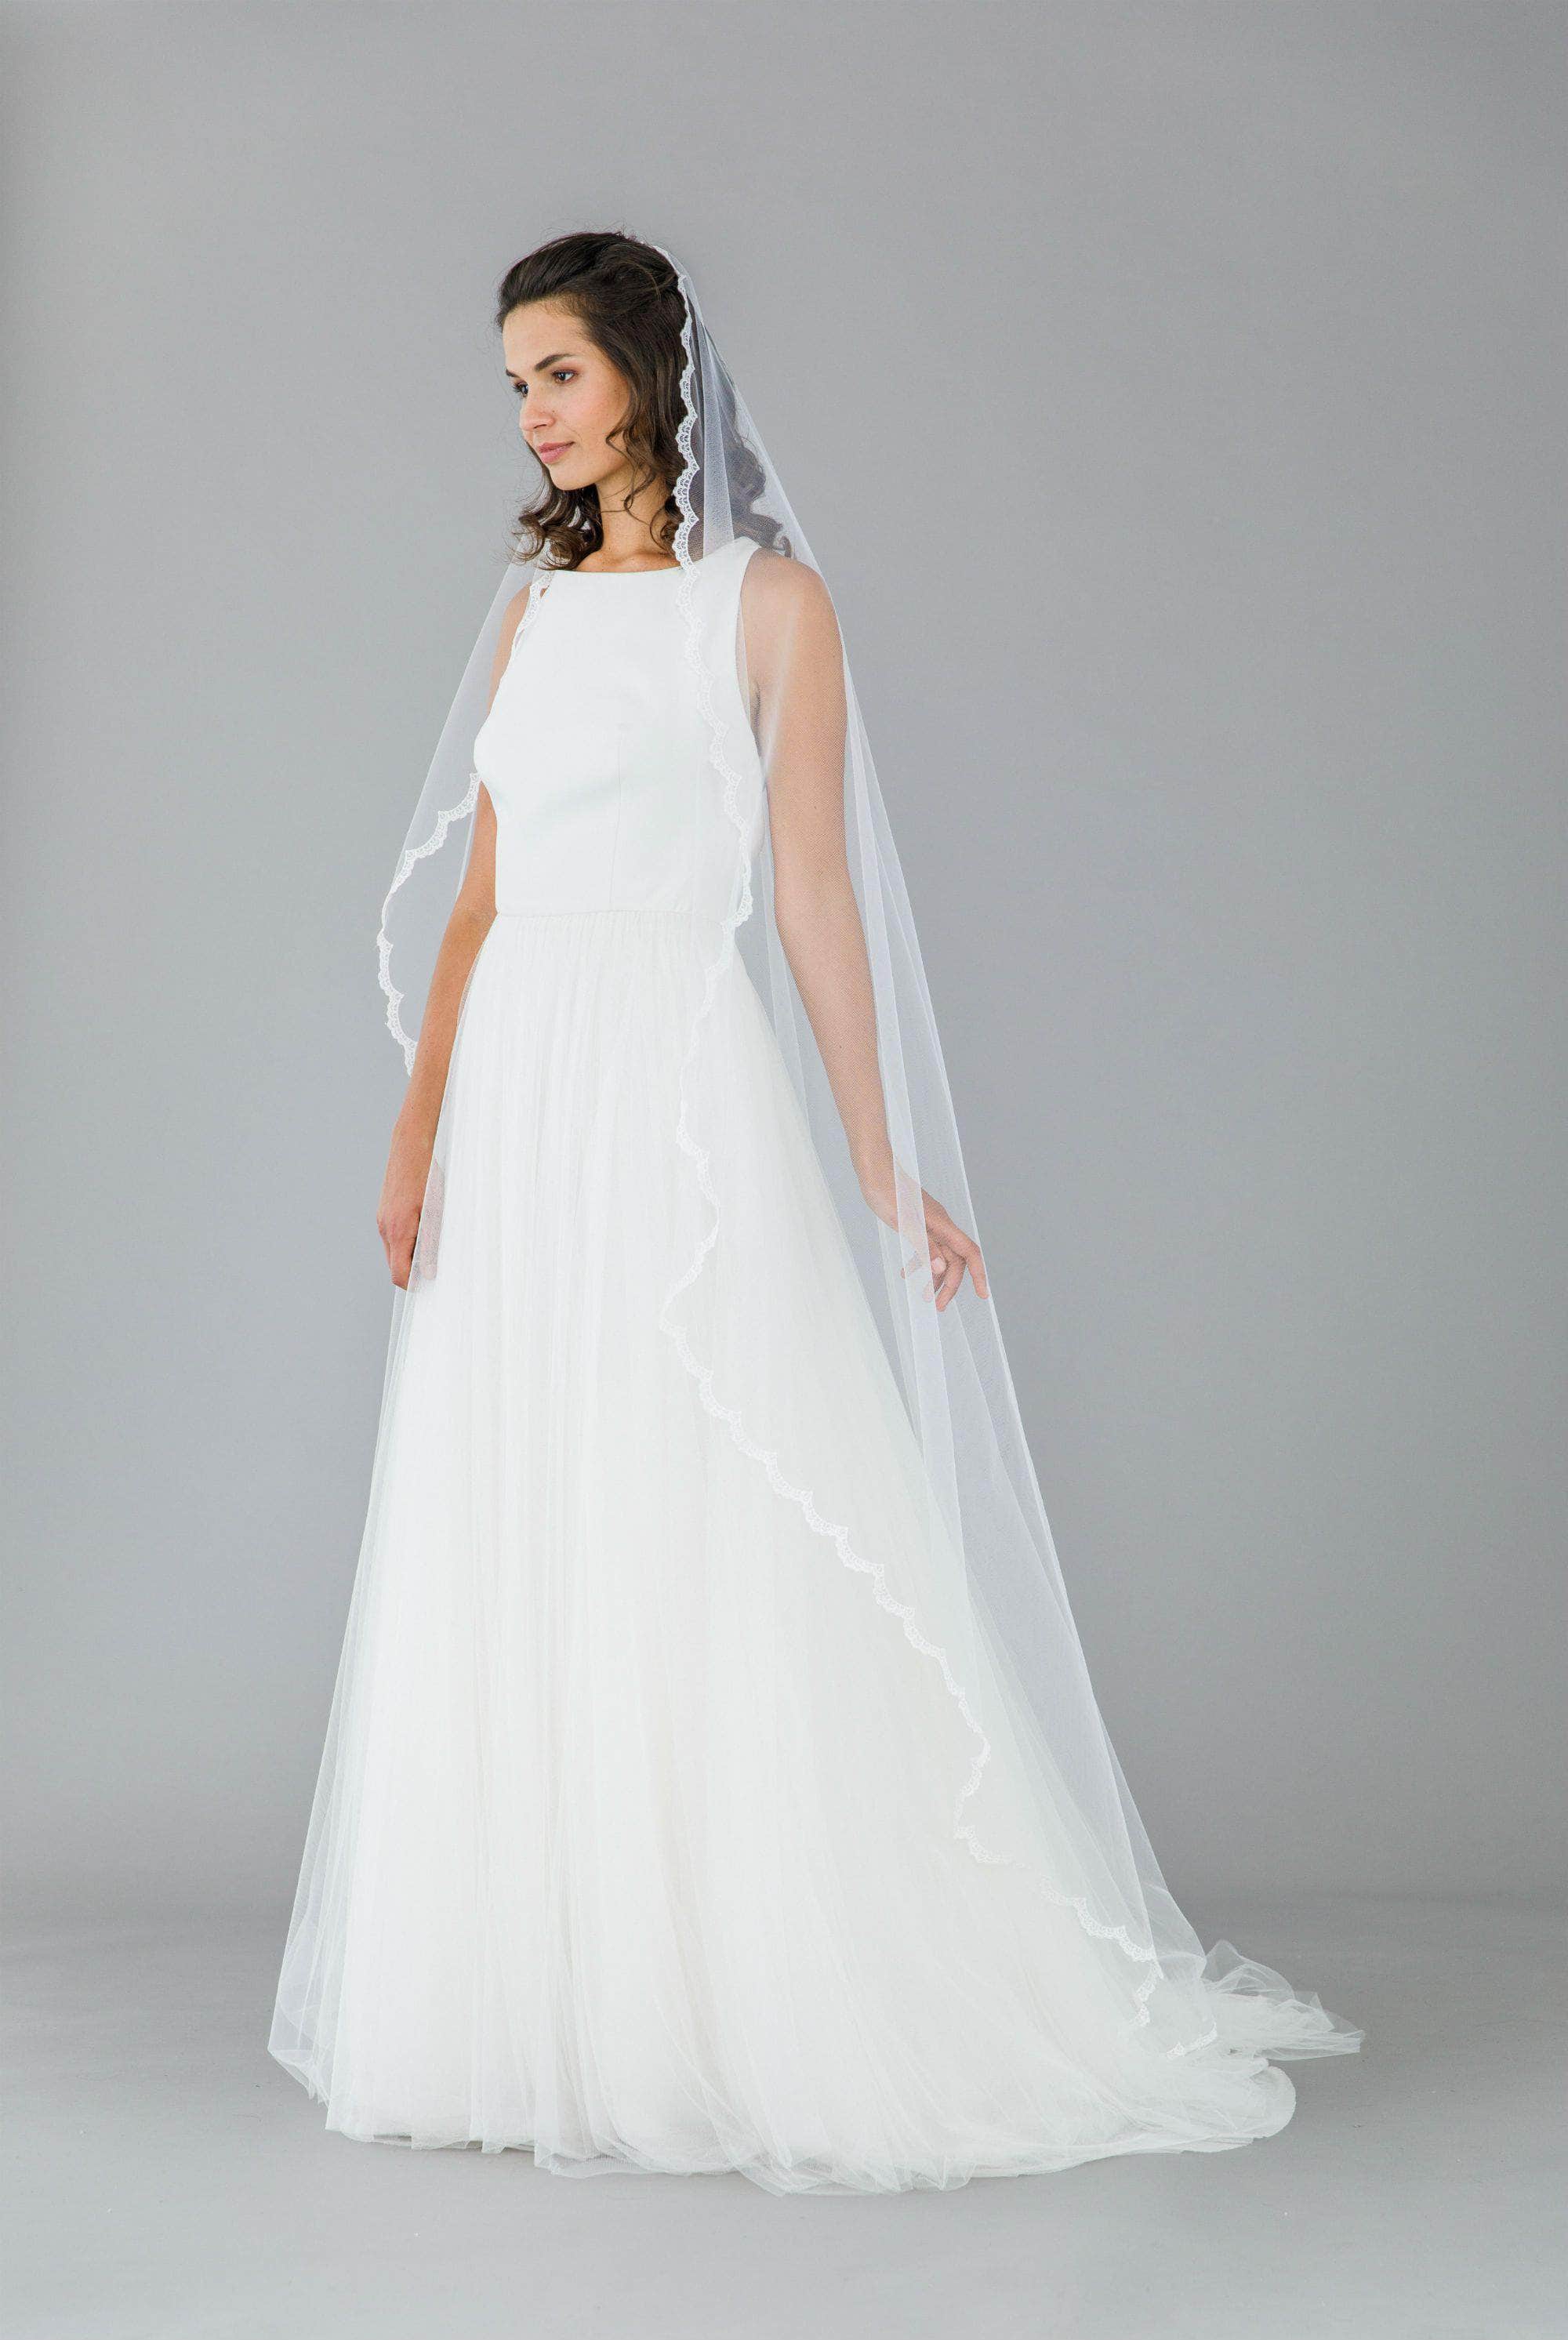 Wedding Veil Full lace edged barely there wedding veil - 'Adeline'